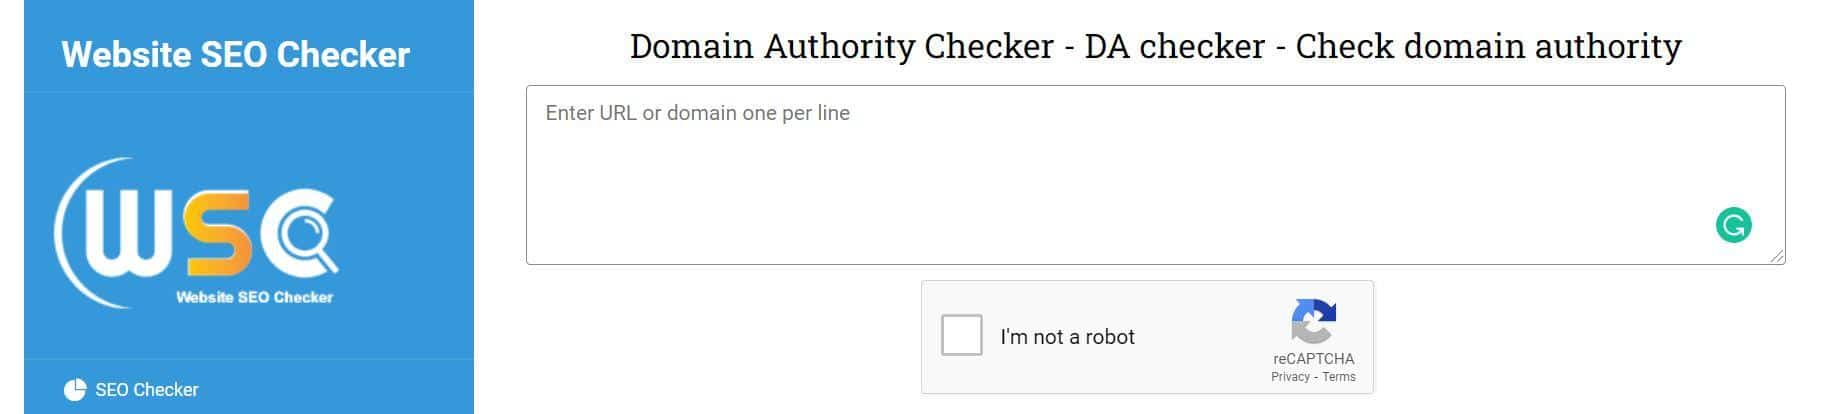 domain authority check of expired domains